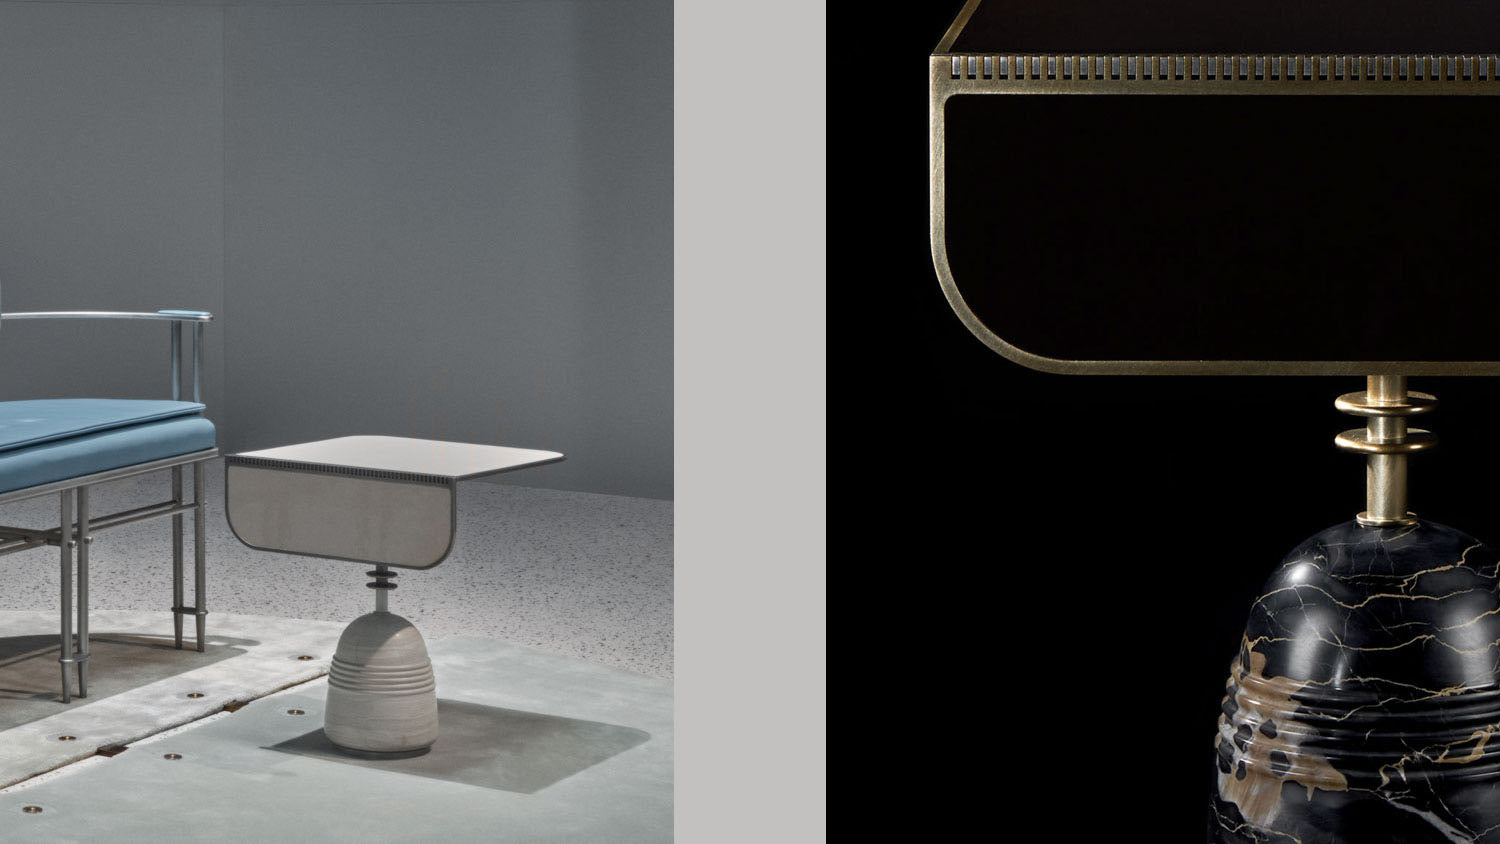 STANDBY side table in Powder Patent Leather, Silk Georgette Marble and Tarnished Silver, alongside an image of a side table in Black Patent Leather, Nero Portoro Marble and Aged Brass. 